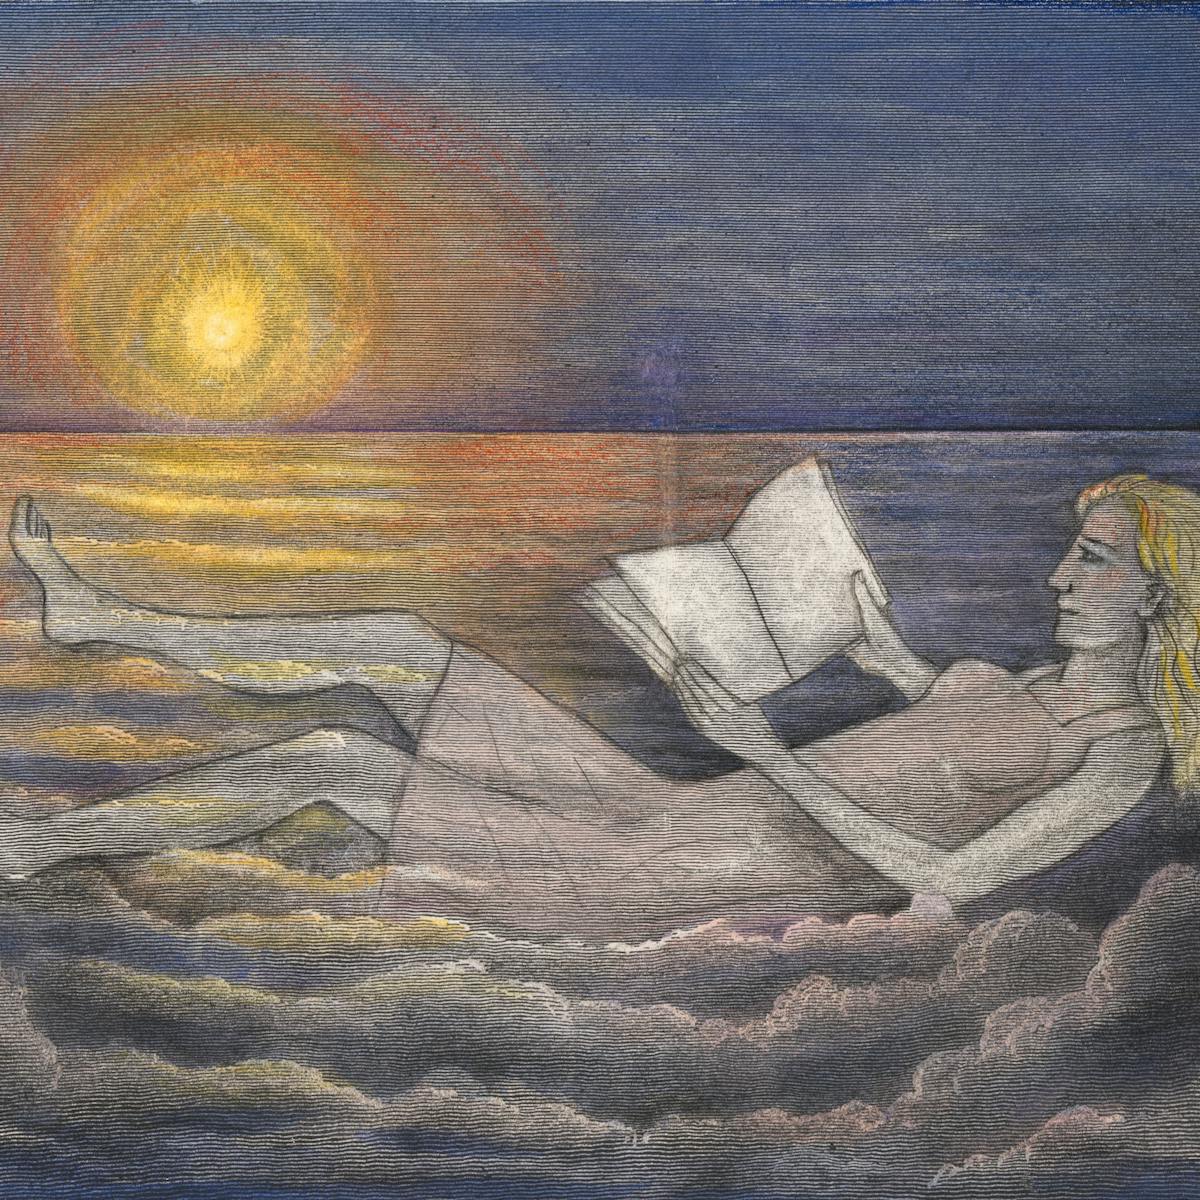 Pencil and watercolour artwork drawn over an engraving which depicts a sky-scape of clouds with the sun shining across them. Drawn on the clouds is a reclining woman wearing a dress, reading a book. The warm orange and yellow hues of the sun stretch out into the blue hues of the sky and the clouds.